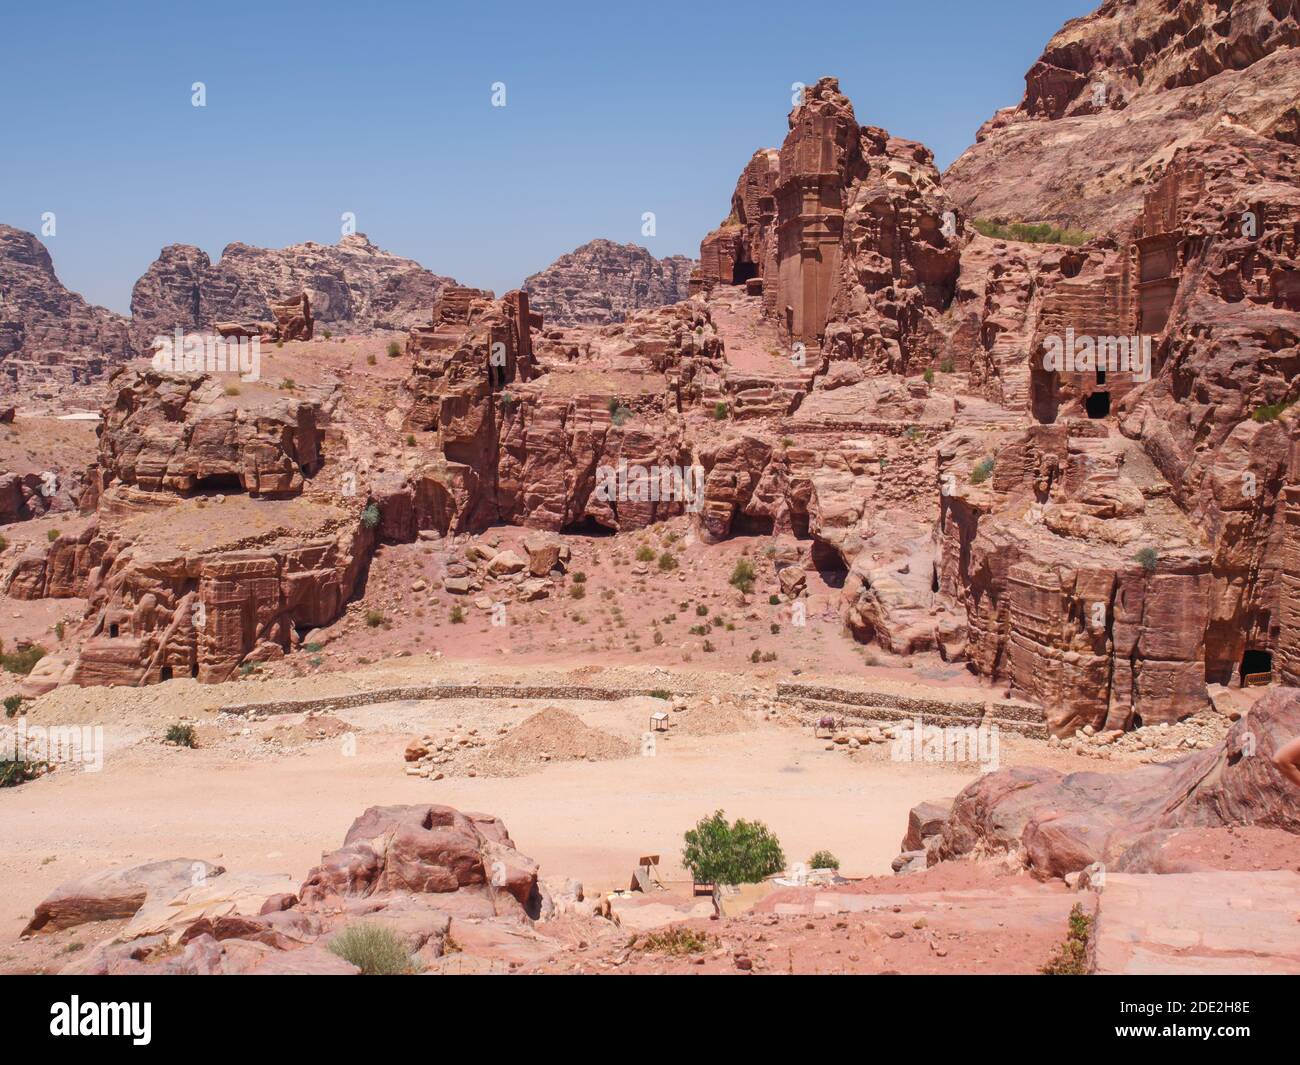 Nabataean tombs in the ancient Arab Nabatean Kingdom city of Petra. Stock Photo